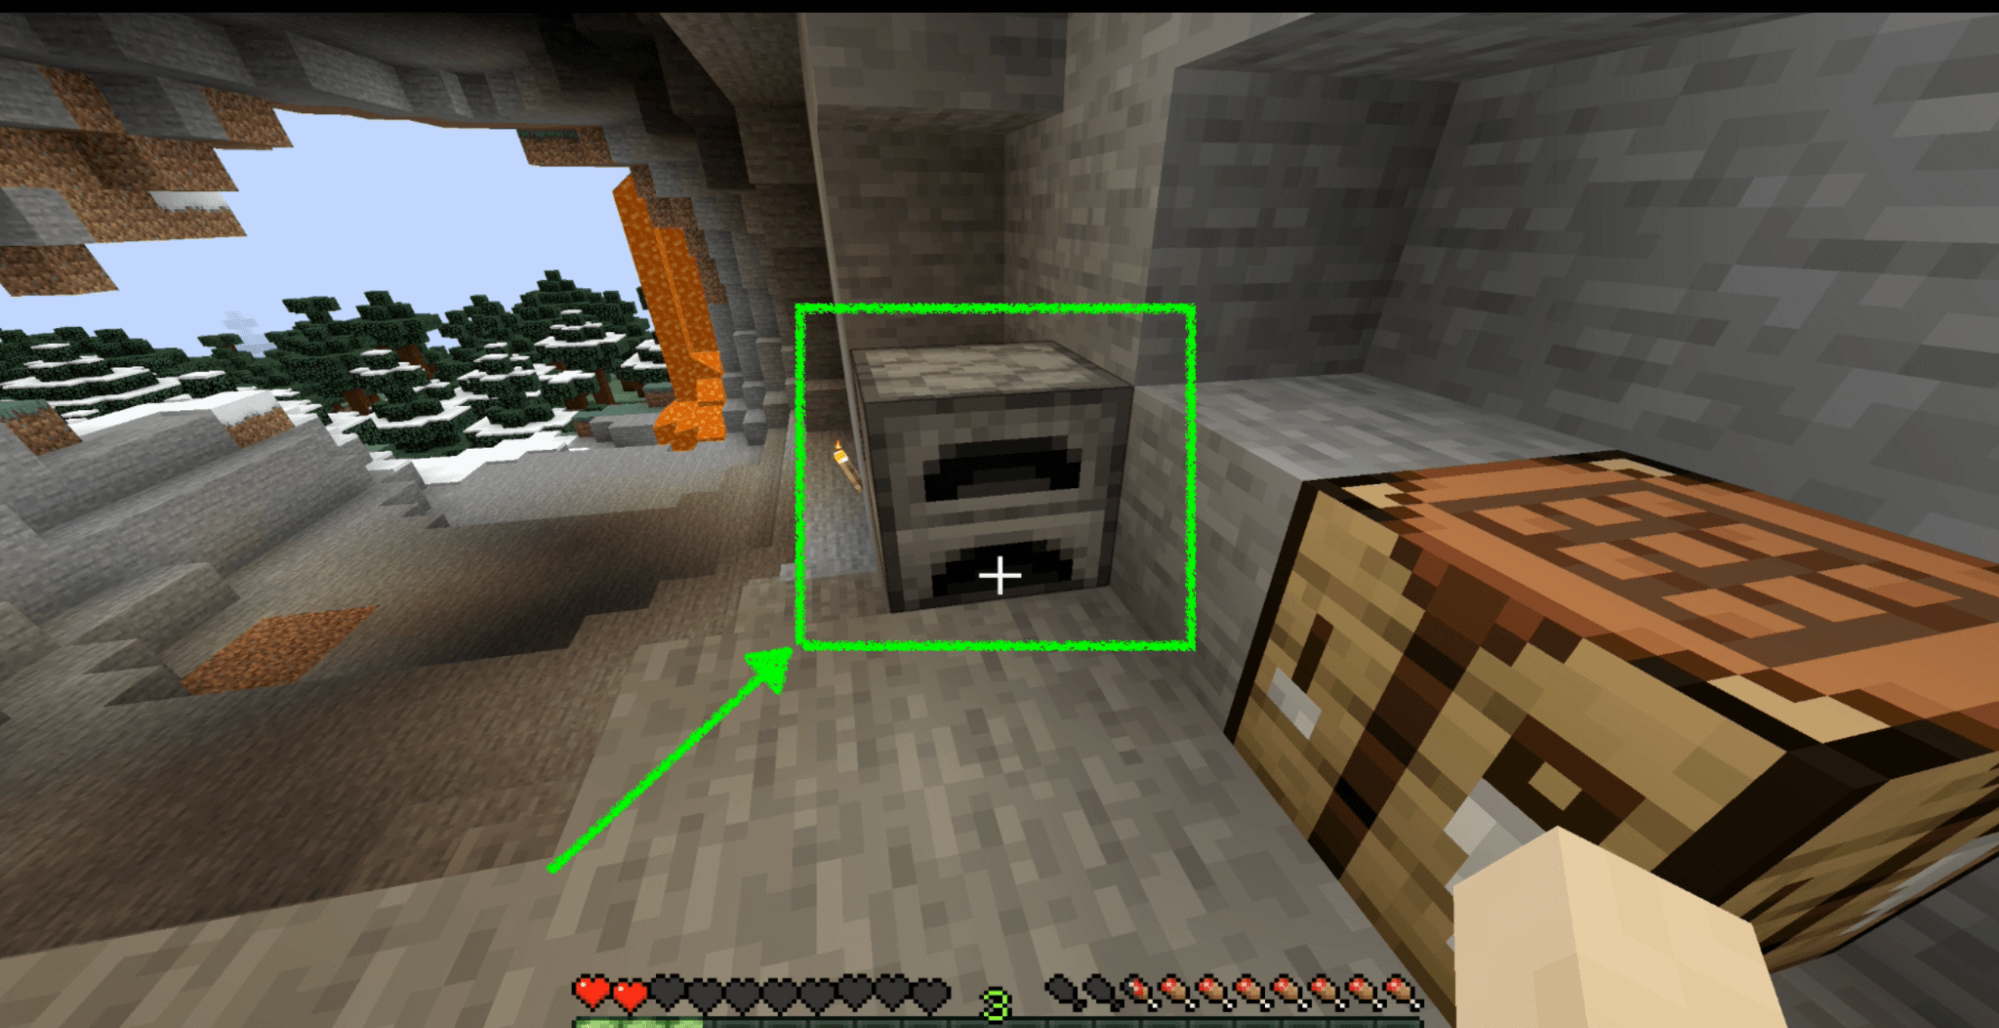 Place the furnace on the ground